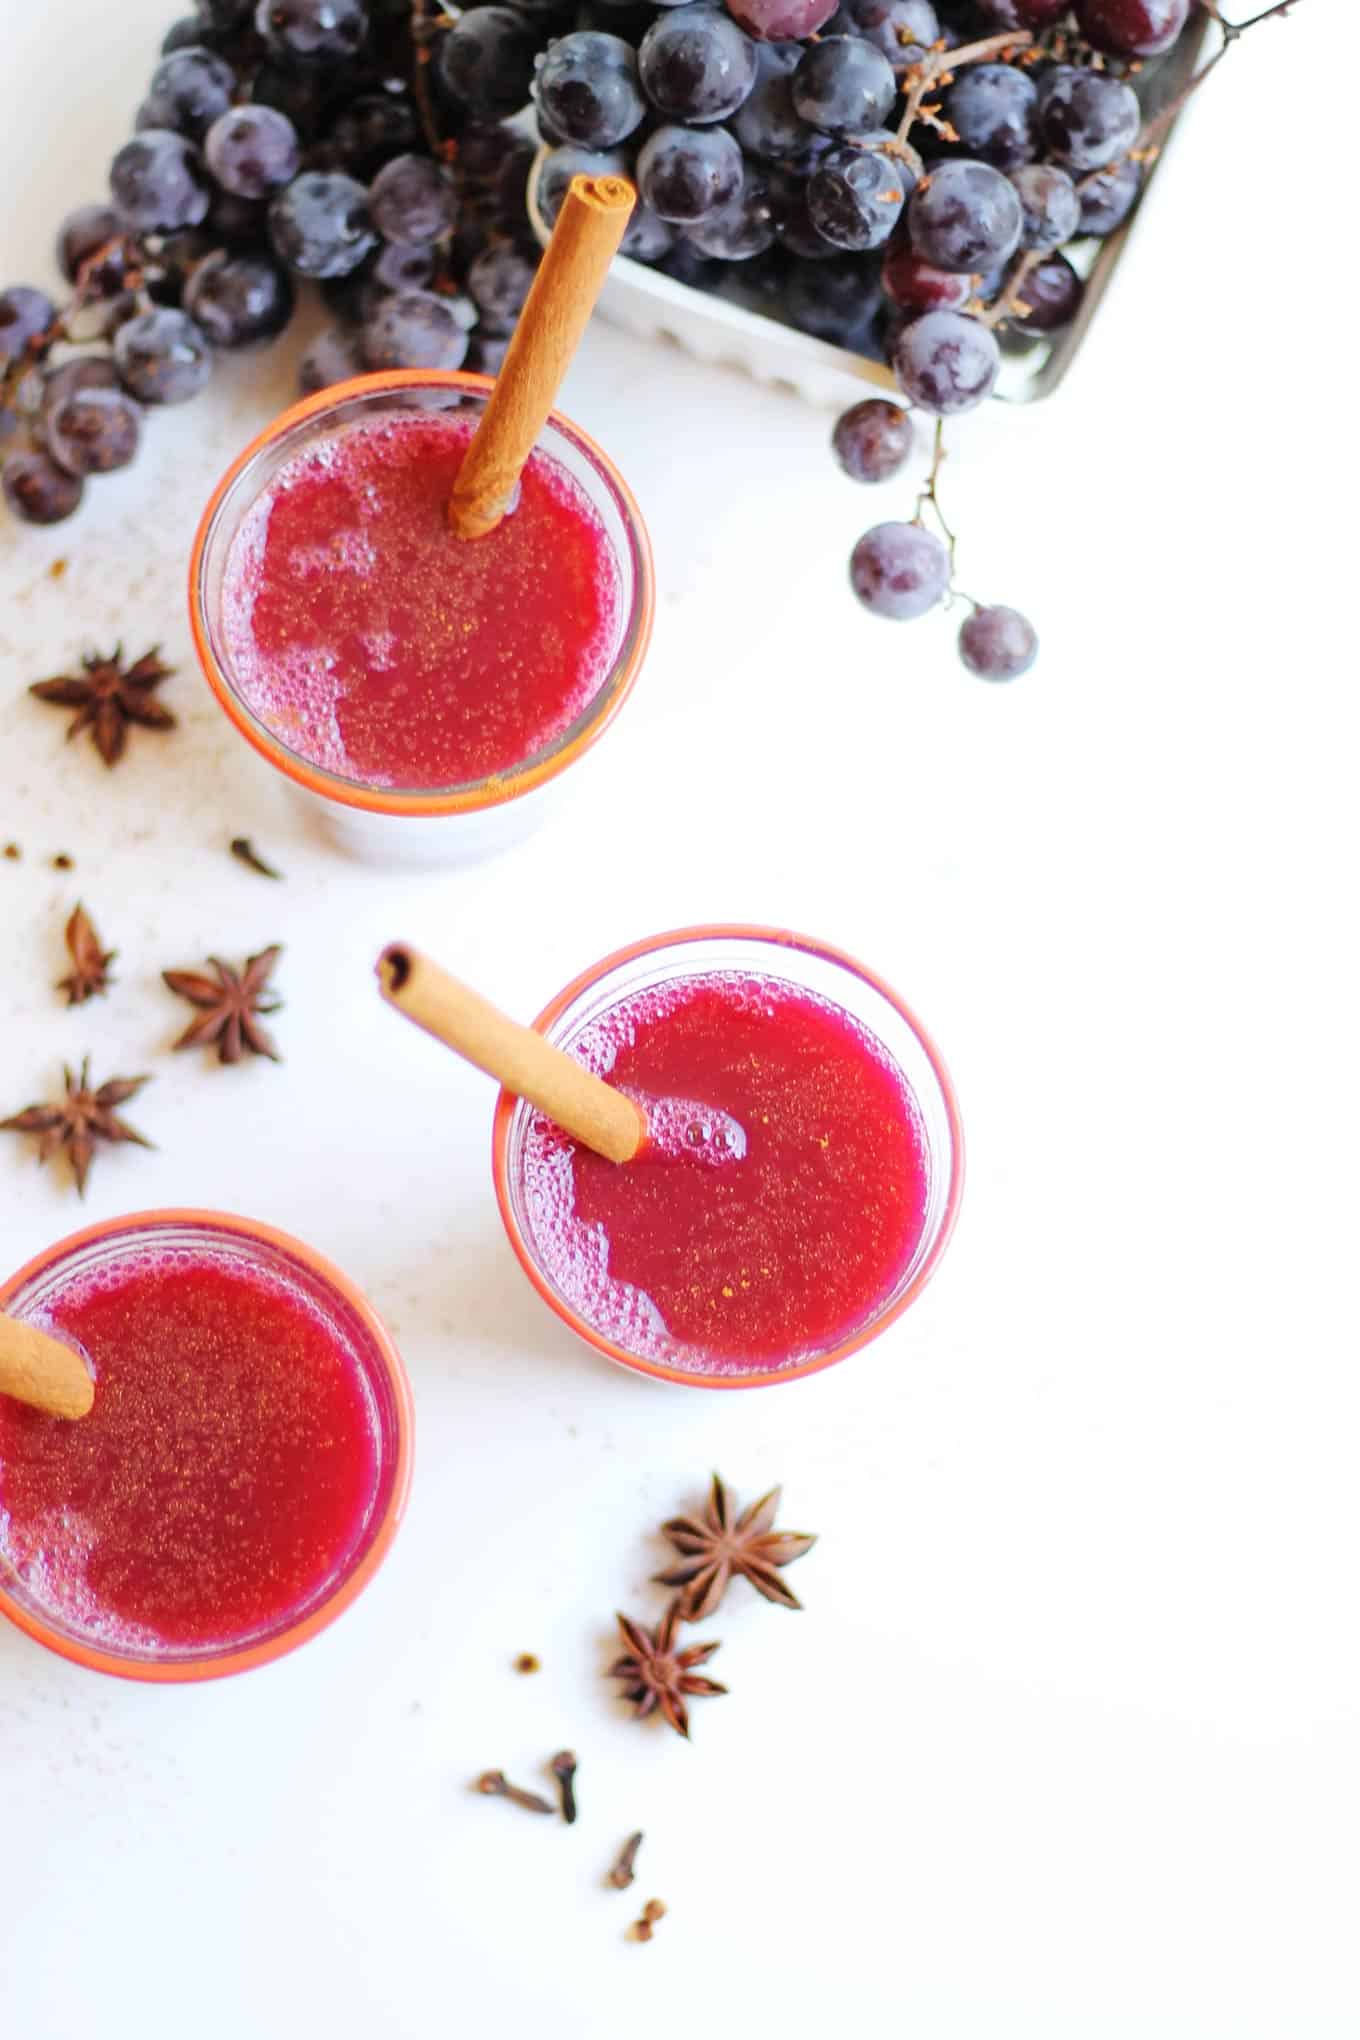 30 minute mulled concord grape cider recipe! Make a batch on your stovetop and make your house smell like fall! Sweet enough without any sugar added. The perfect drink for your fall party, or just getting cozy. Naturally vegan and refined sugar free. // Rhubarbarians #grapecider #falldrink